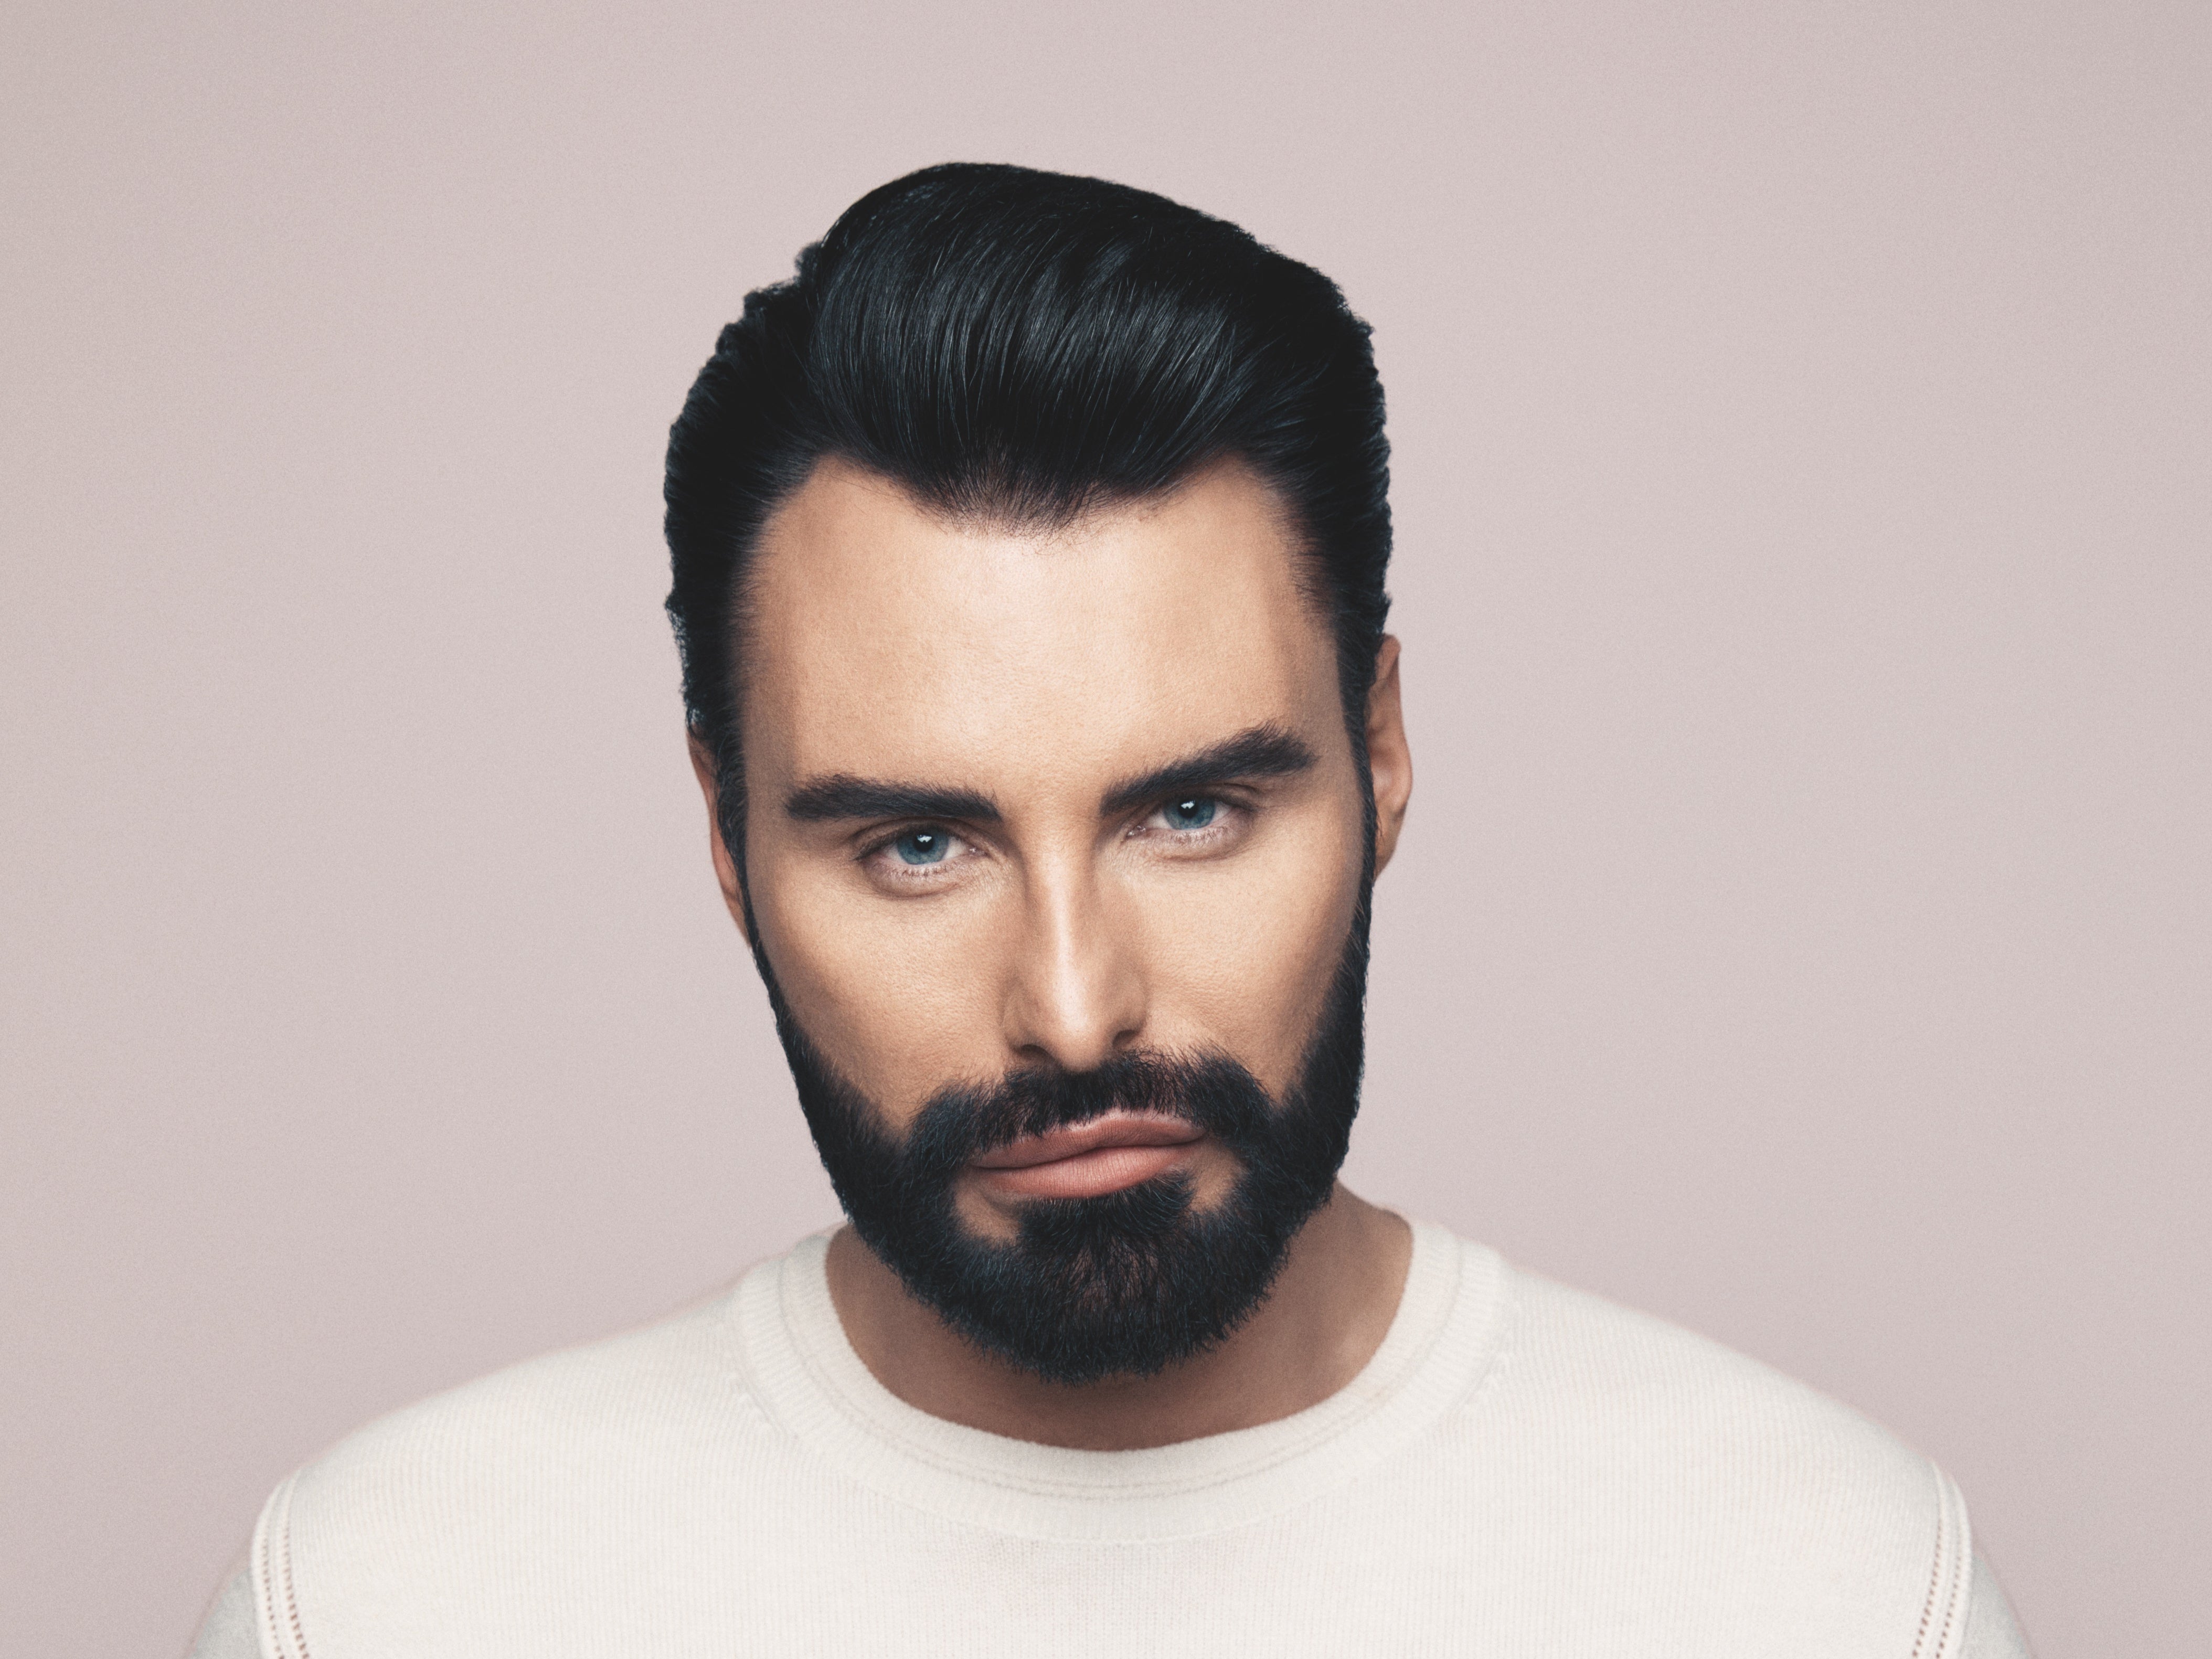 ’The first version of my book would have ruined lives:’ TV and radio star Rylan on his new book, his breakdown and the forthcoming ‘Big Brother’ reboot